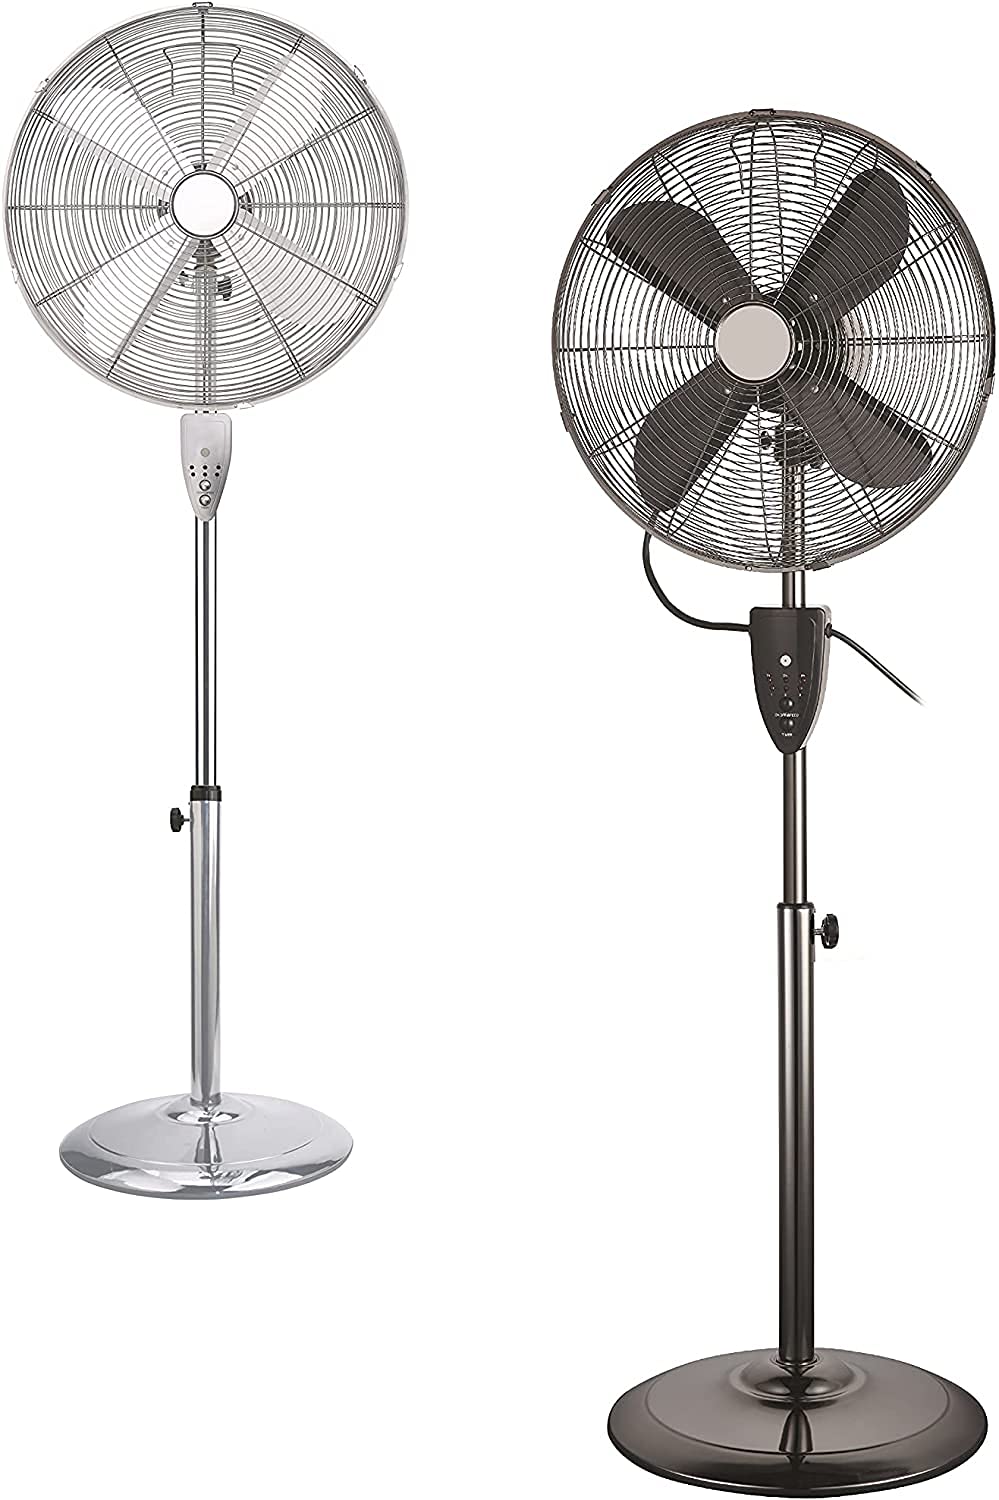 HYGRAD® 16" Oscillating Pedestal Air Cooling Fans Floor Standing Fans In Chrome Or Gun Metal 3 Speel With Remote Control (Chrome or Gun Metal)